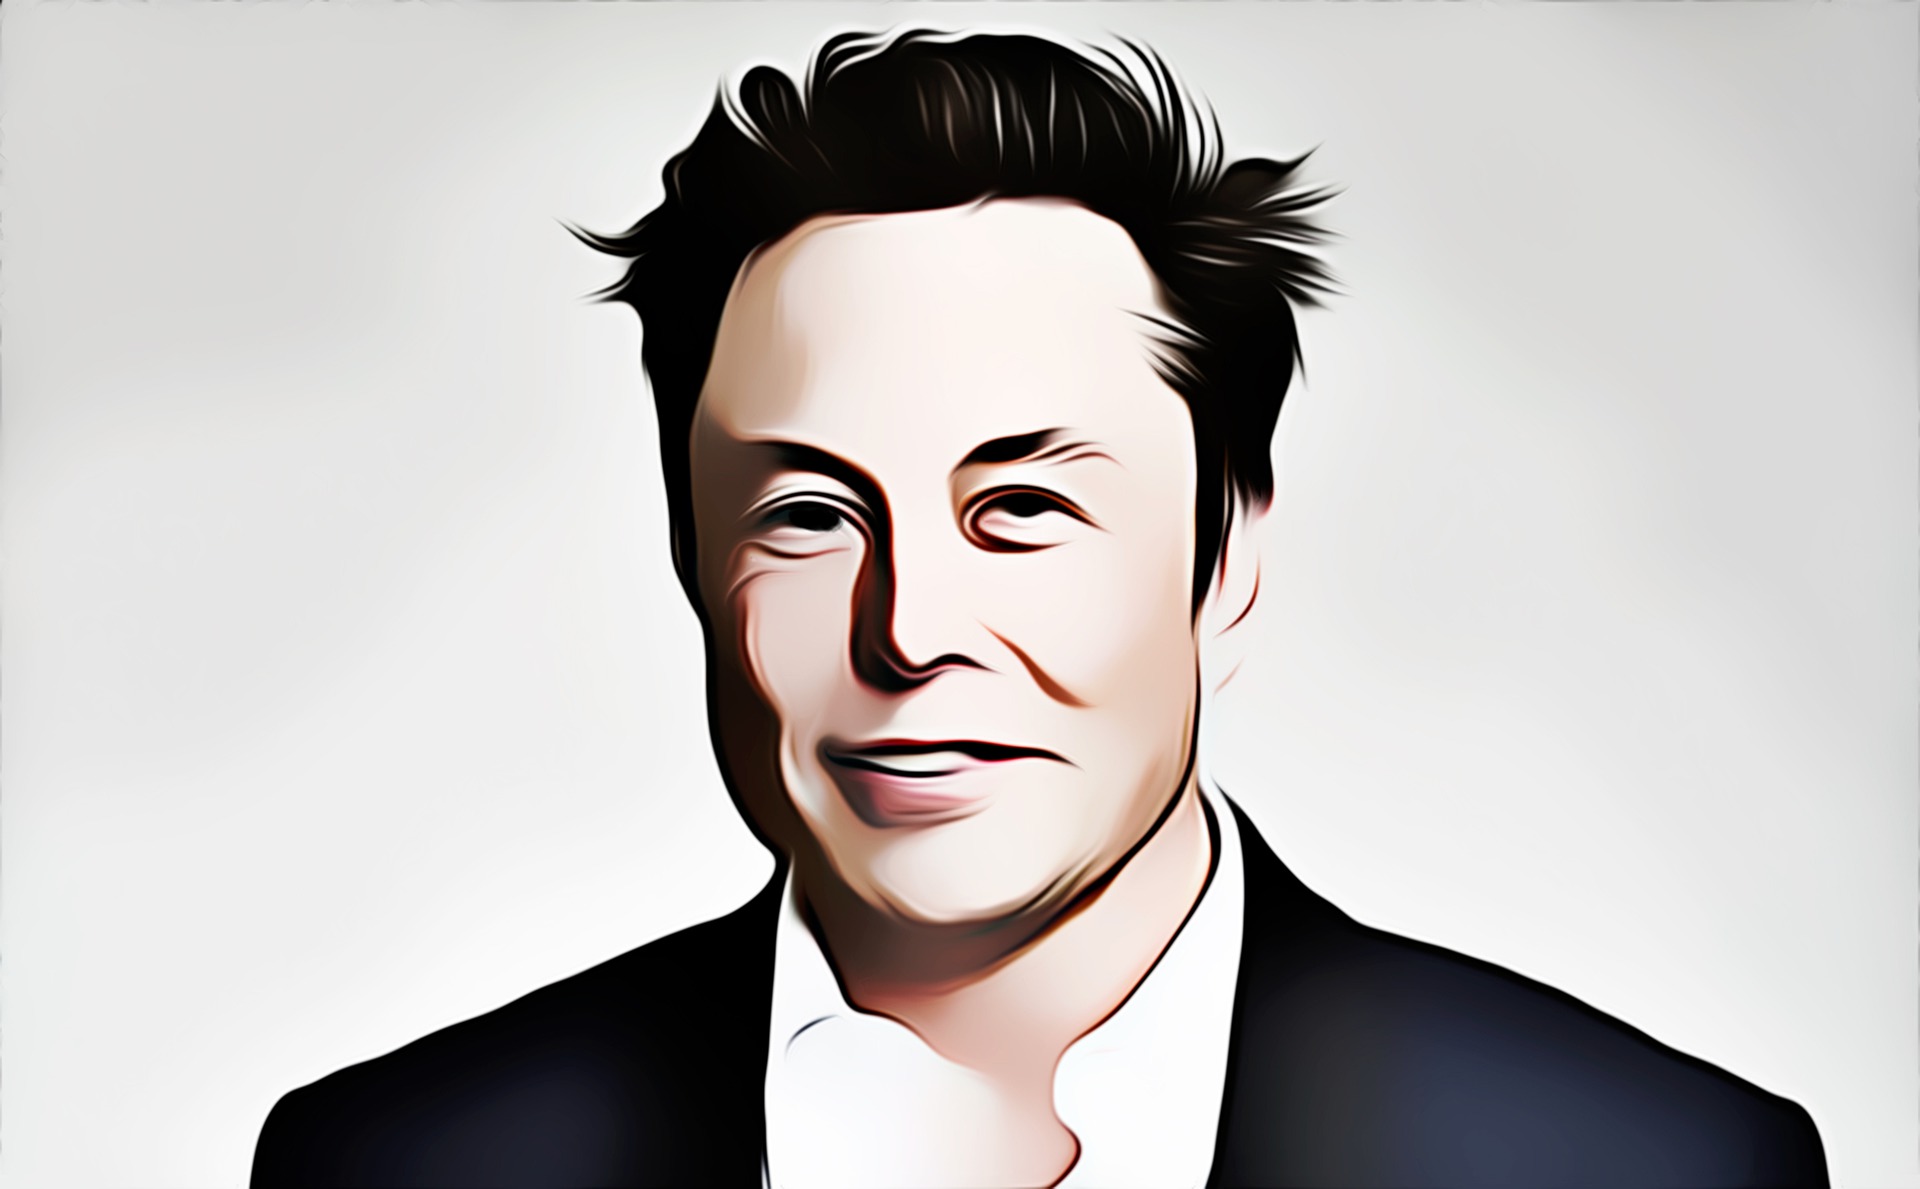 Elon Musk in a Black suit painting